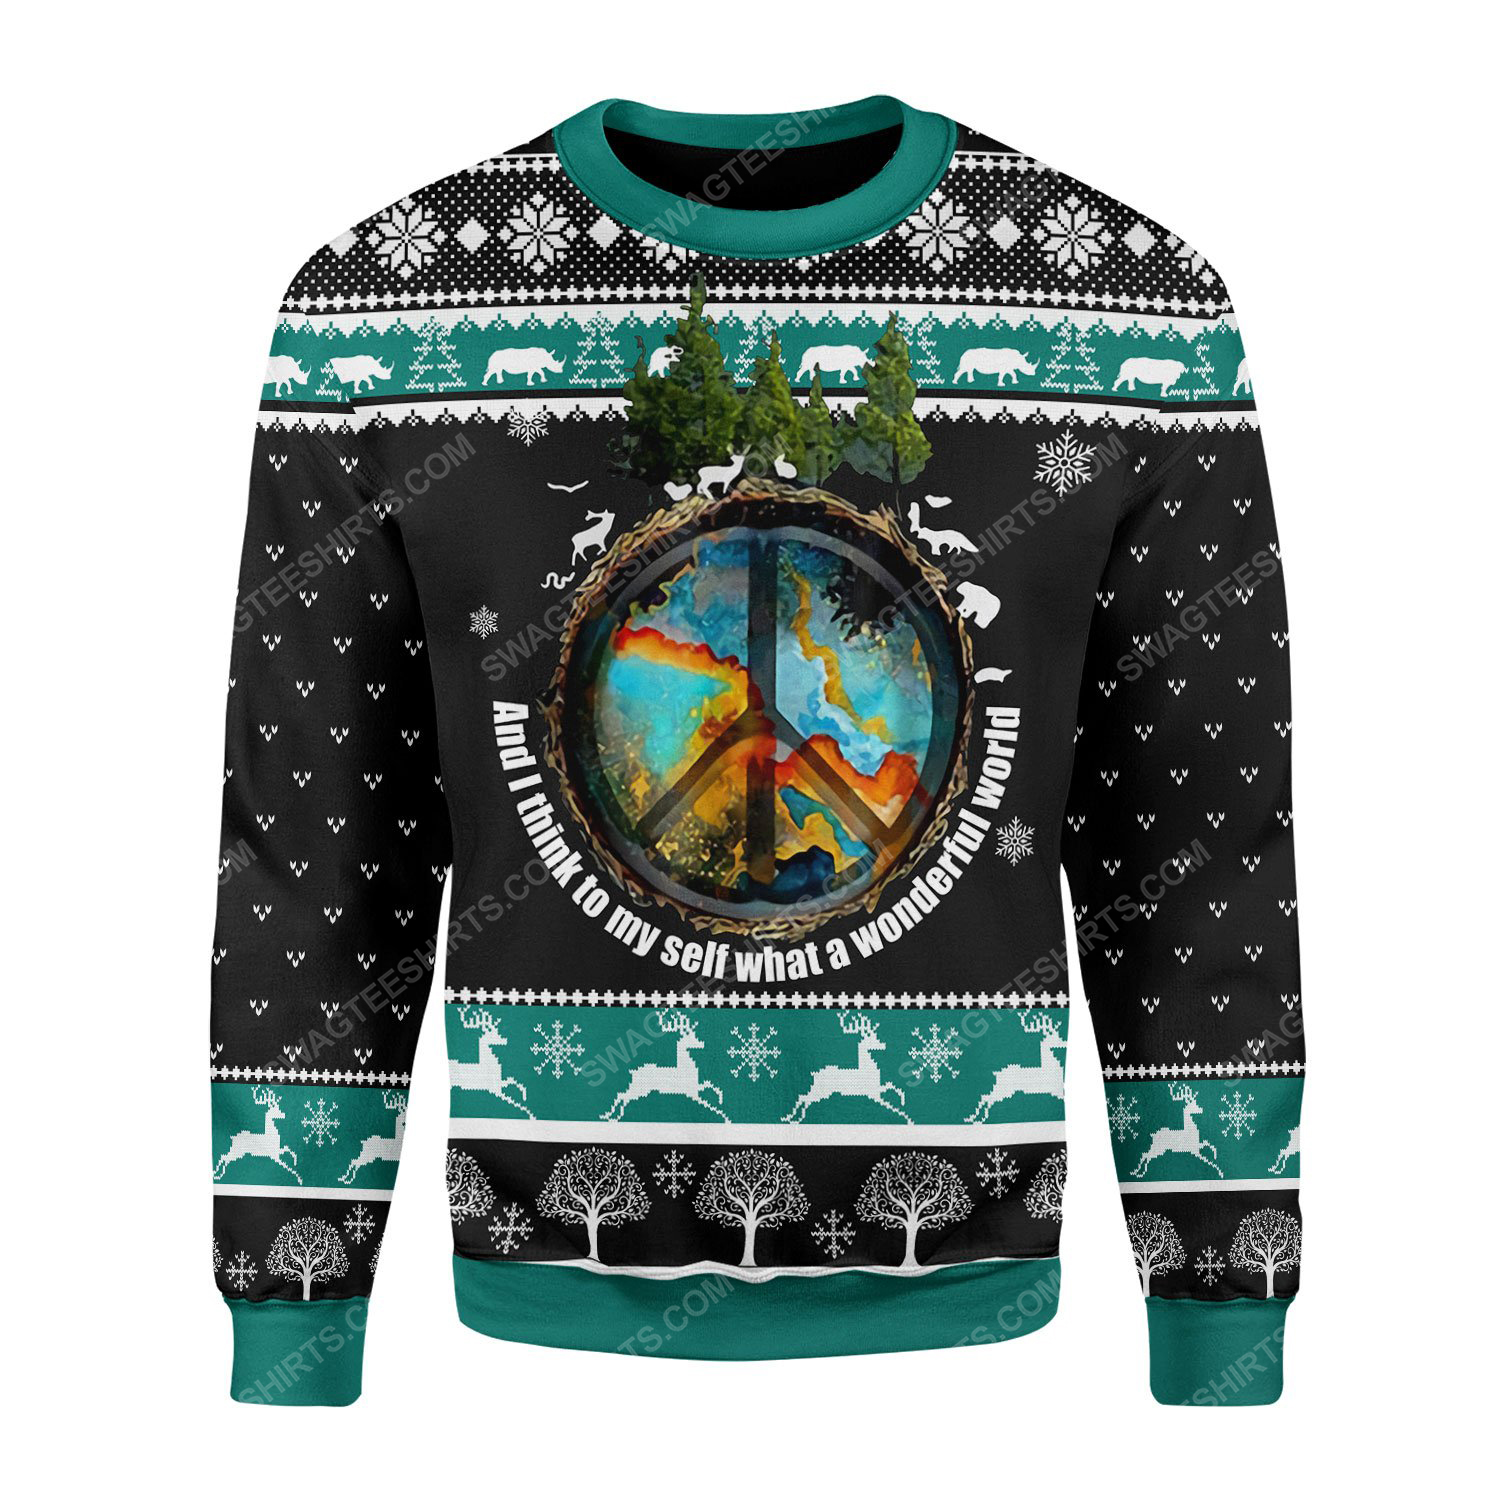 And i think to myself what a wonderful world ugly christmas sweater 2(1) - Copy